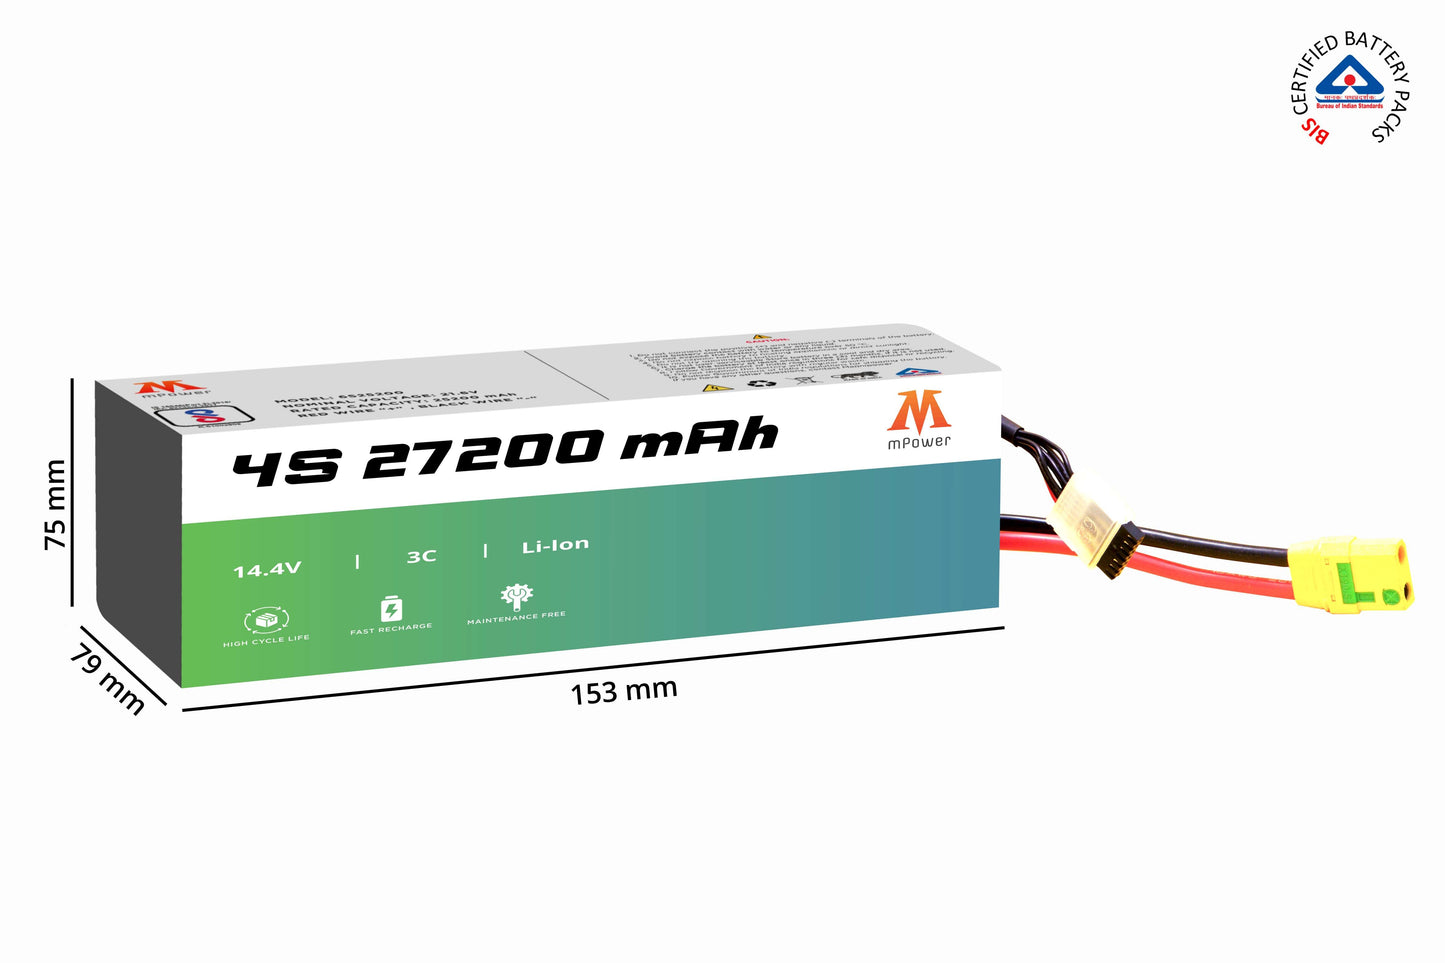 mPower 4S 27200mAh Lithium-Ion Battery for Surveillance Drones